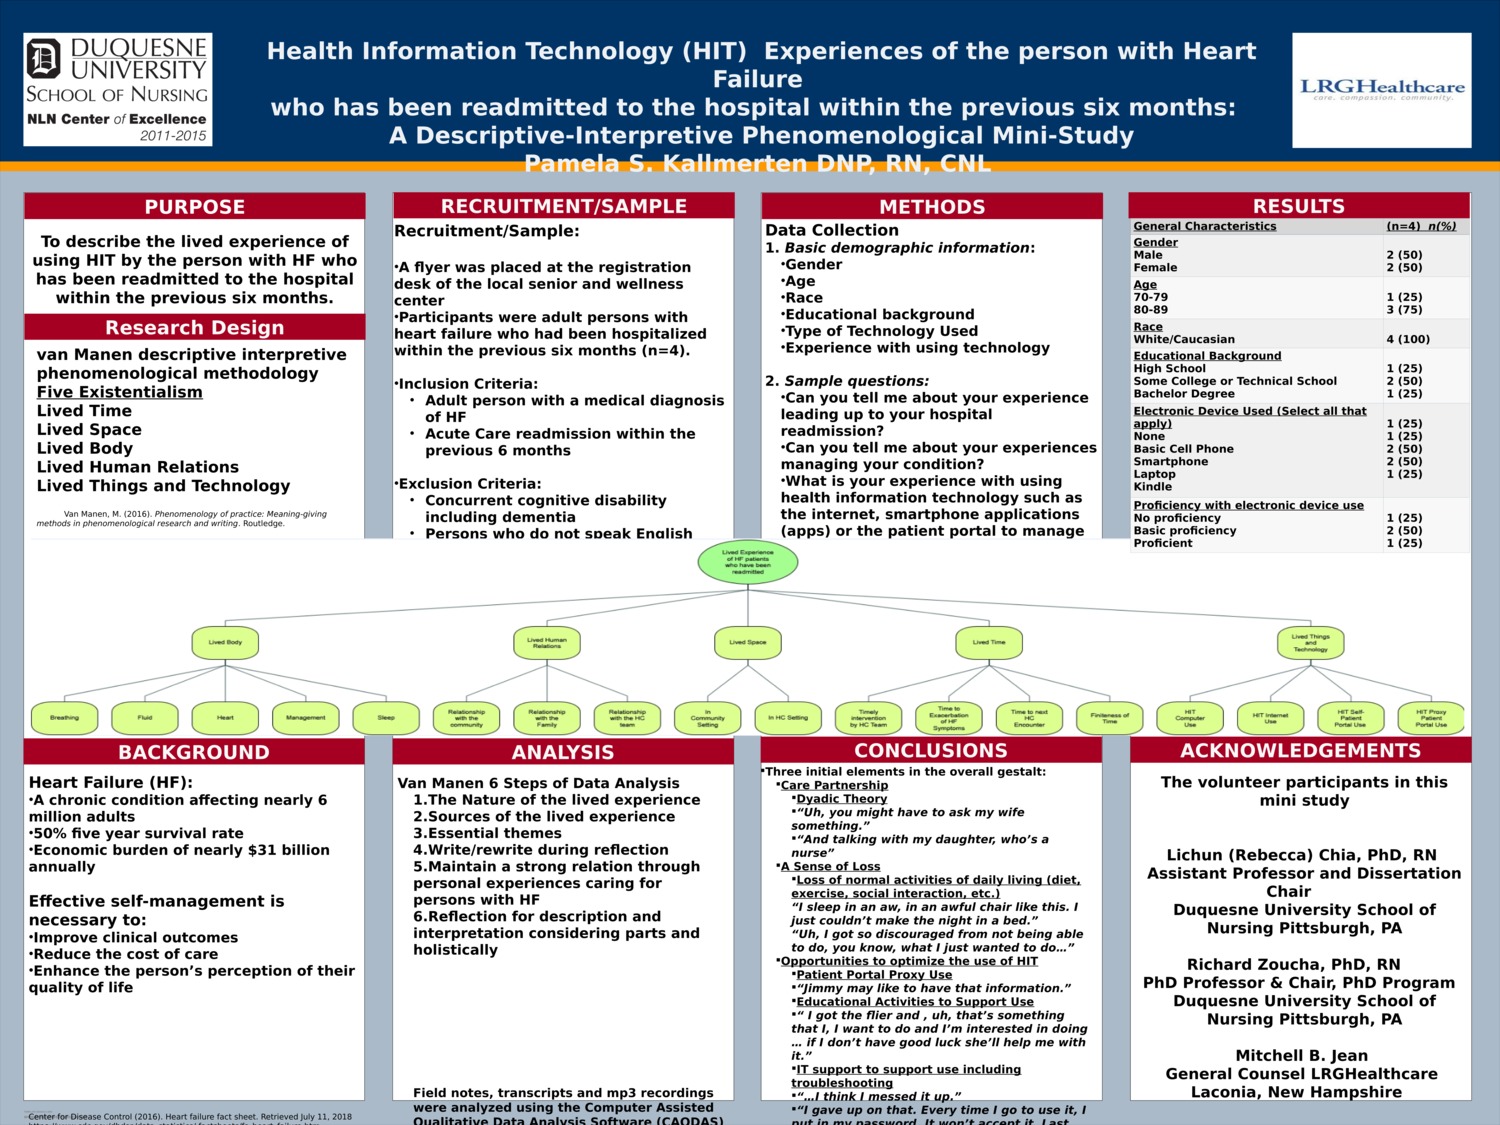 Health Information Technology (Hit) Experiences Of The Person With Heart Failure Who Has Been Readmitted To The Hospital Within The Previous Six Months: A Descriptive-Interpretive Phenomenological Mini-Study by psu26